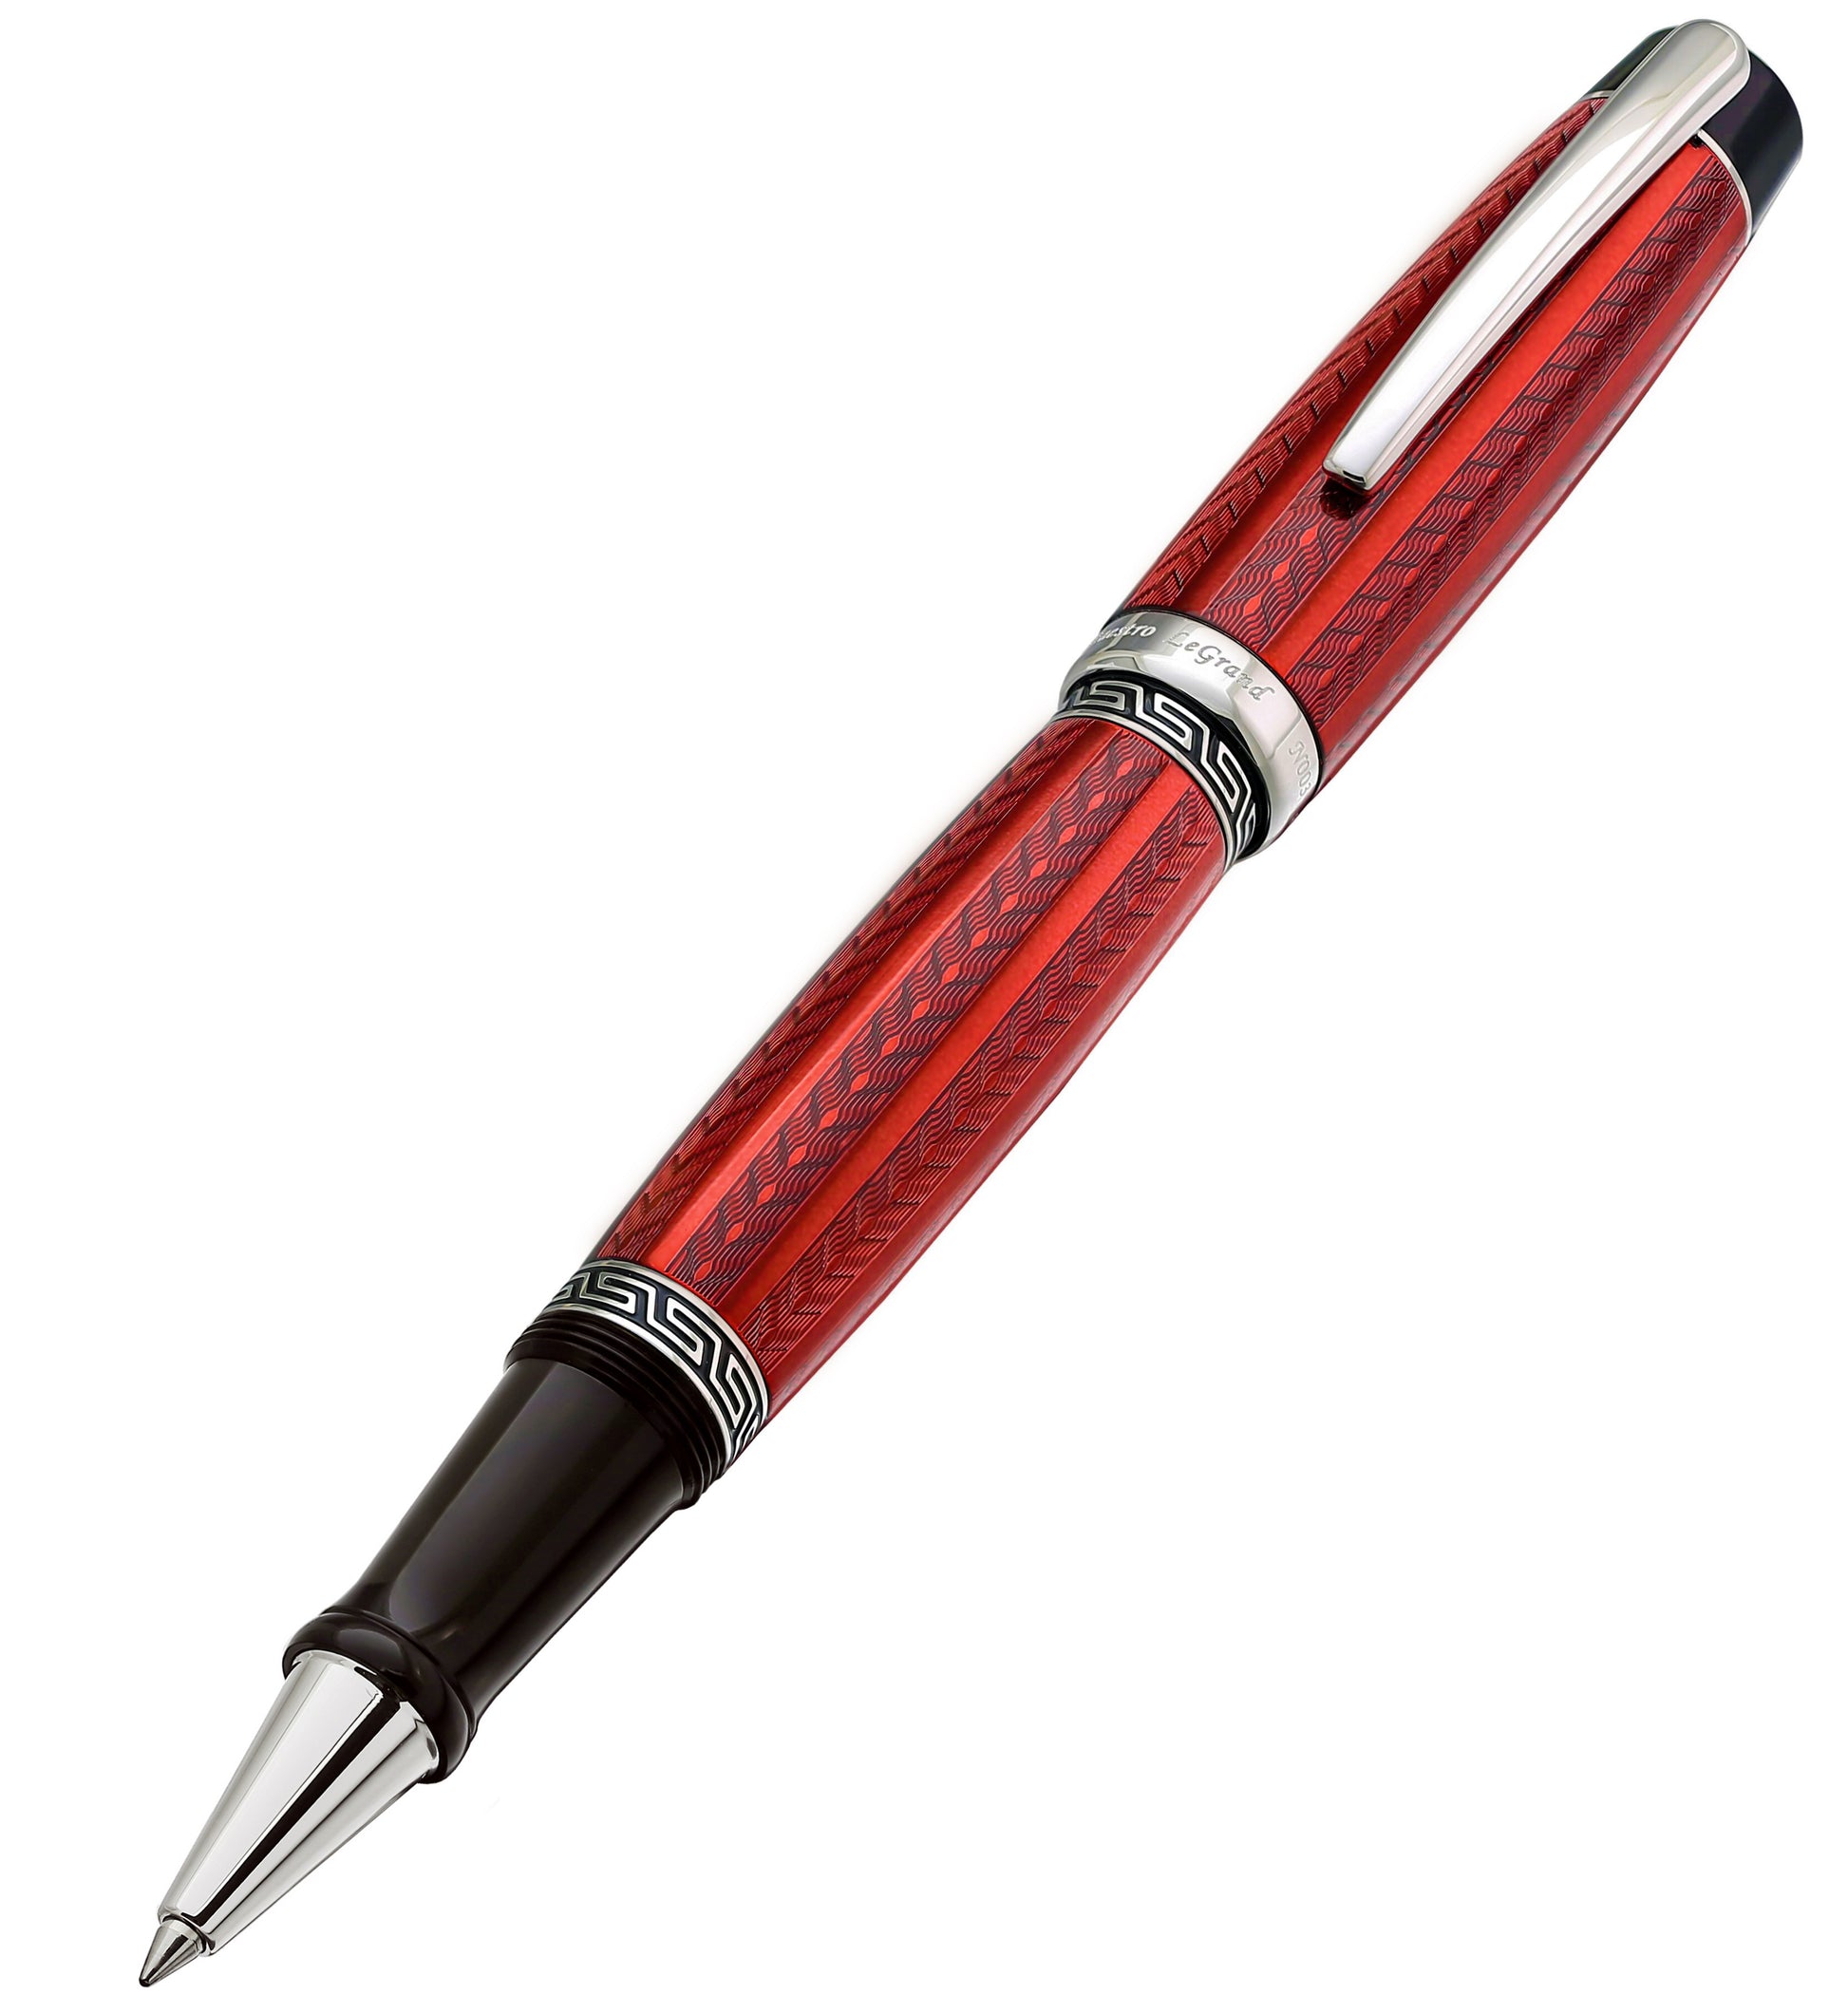 Xezo - Angled view of the front of the Maestro LeGrand Rhodochrosite  R rollerball pen